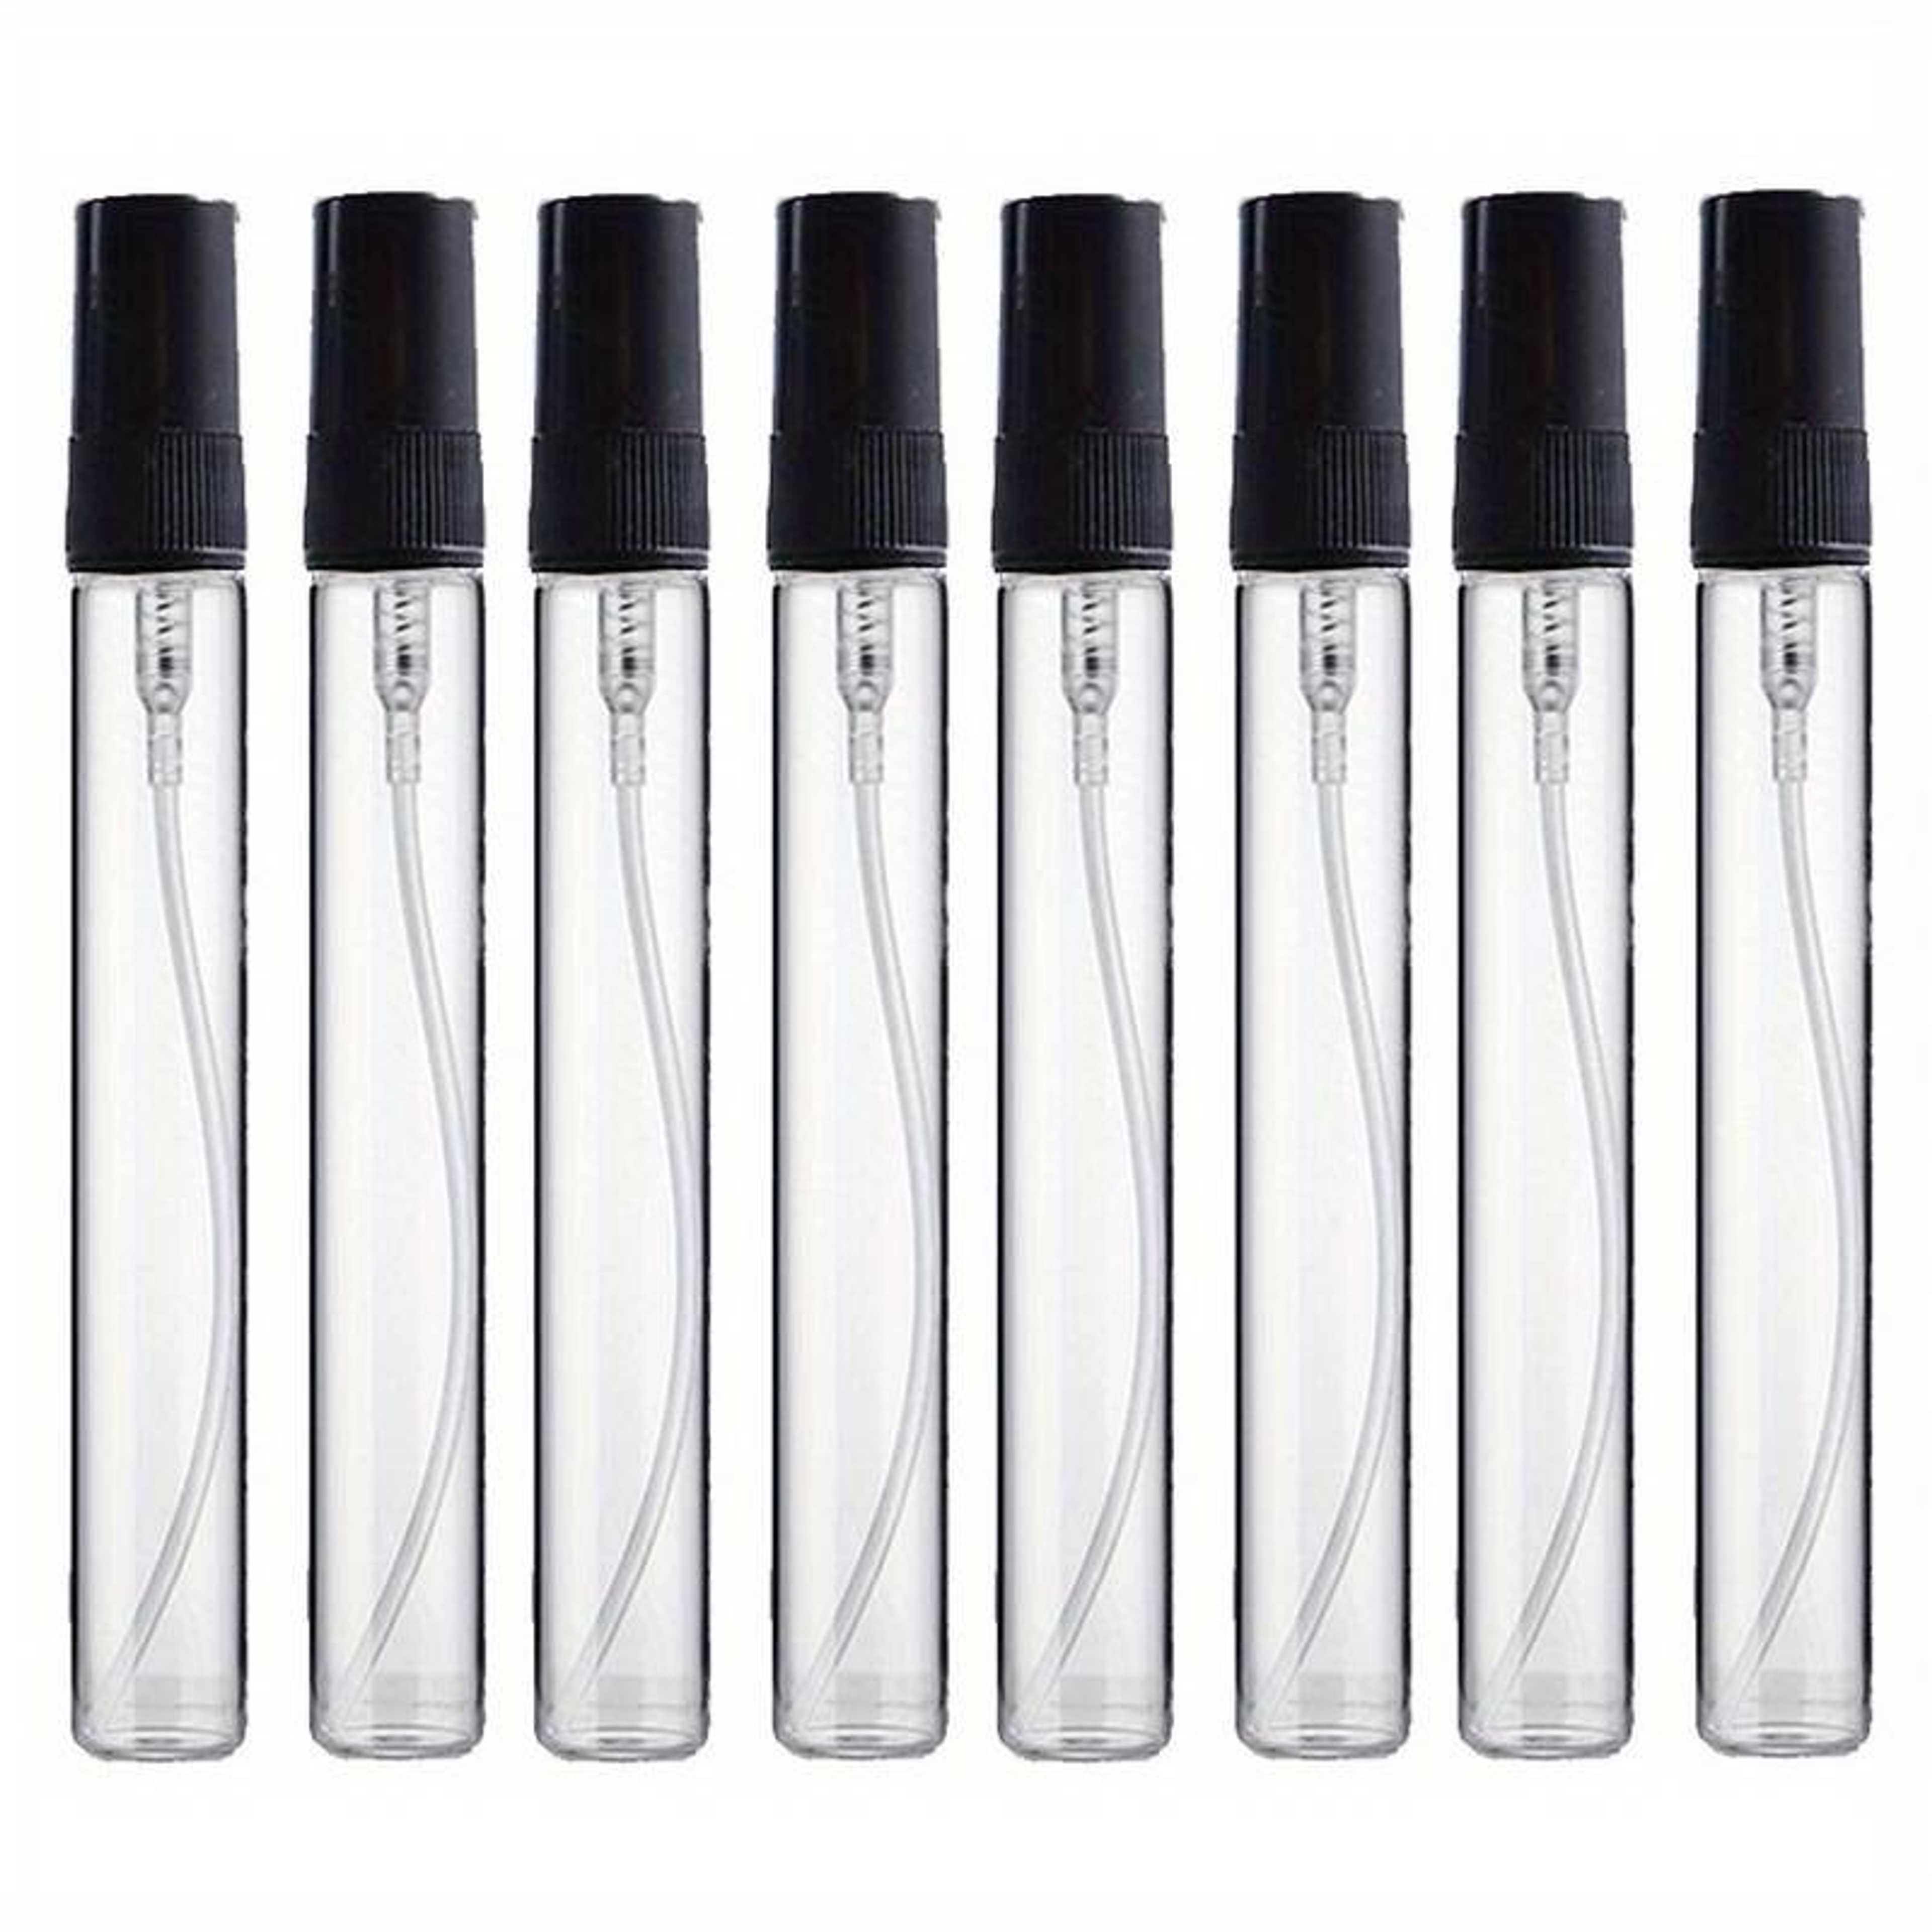 Empty Spray  bottle (Size 10ml ) (Pack of 6 ) Perfume Refillable Atomizer Container, Portable Perfume Spray Bottle, Travel Perfume Scent Fragrance Empty Spray Bottle for Traveling and Outgoing